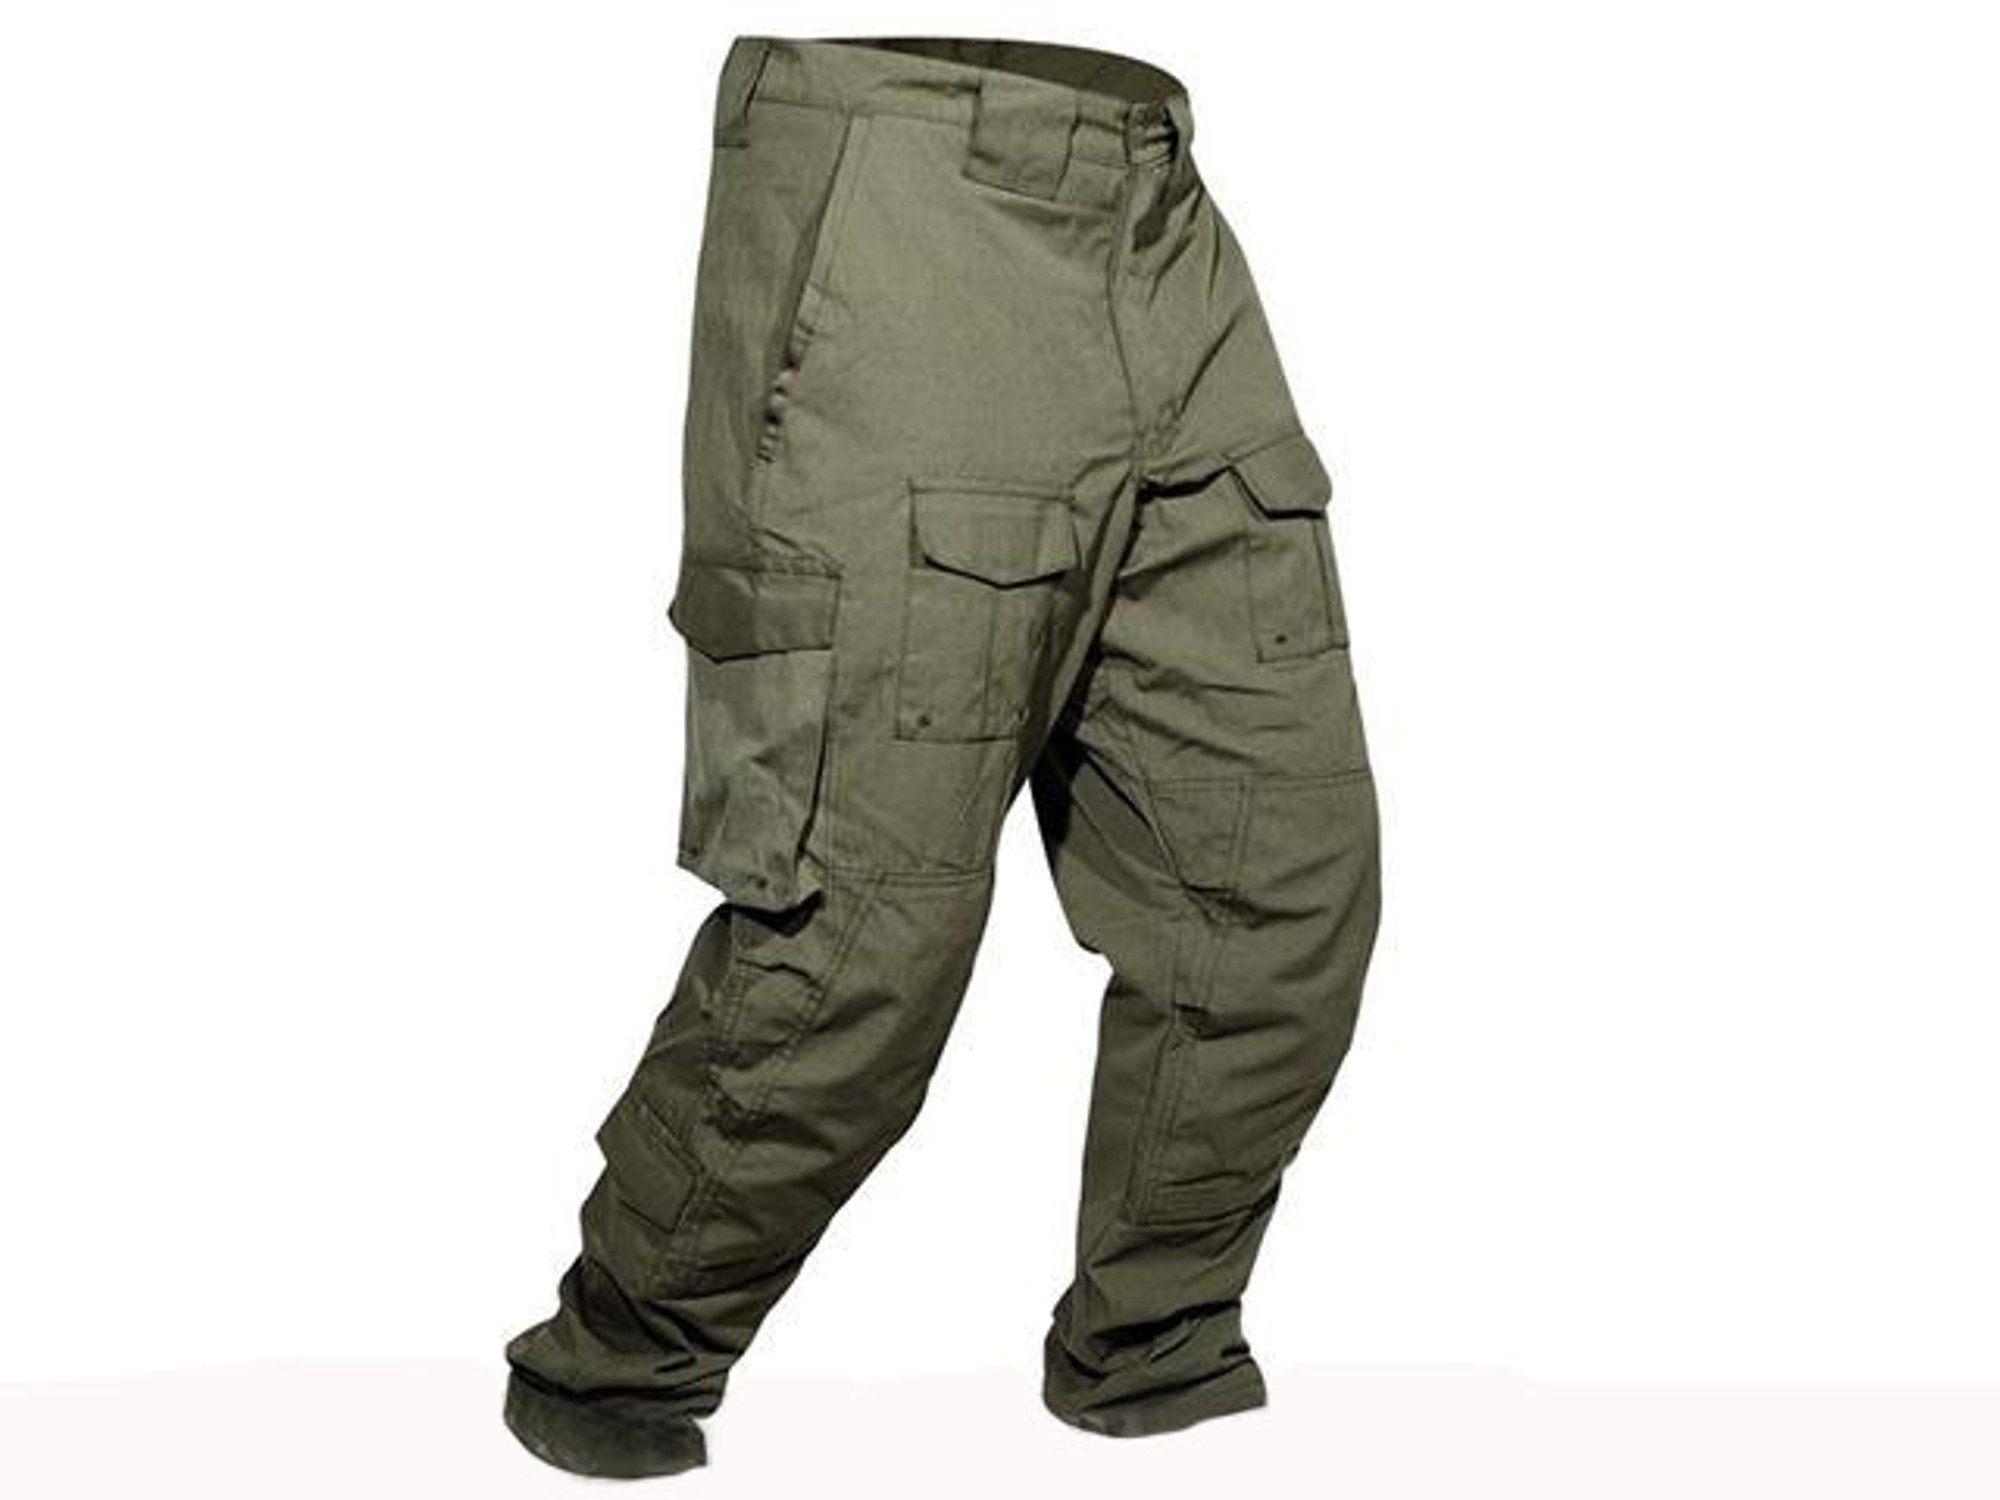 LBX Tactical Camouflage Combat Pant - Ranger Green (Size: Small)